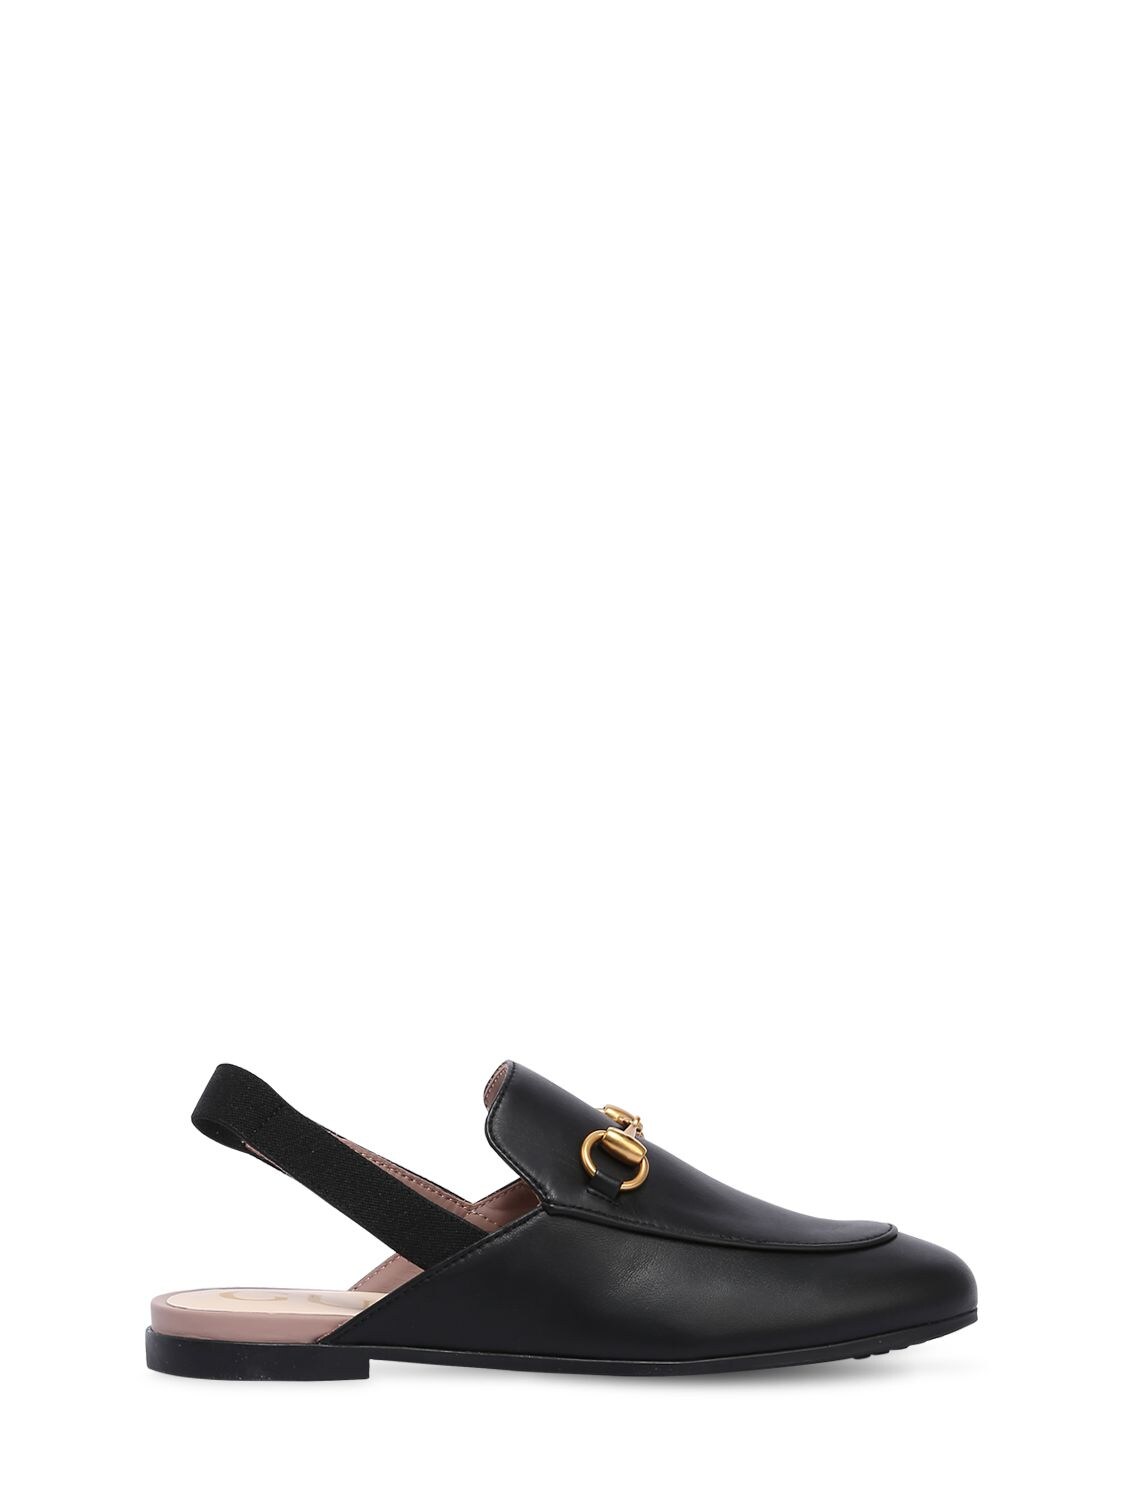 GUCCI HORSEBIT SMOOTH LEATHER MULES,67IFHB009-MTAWMA2